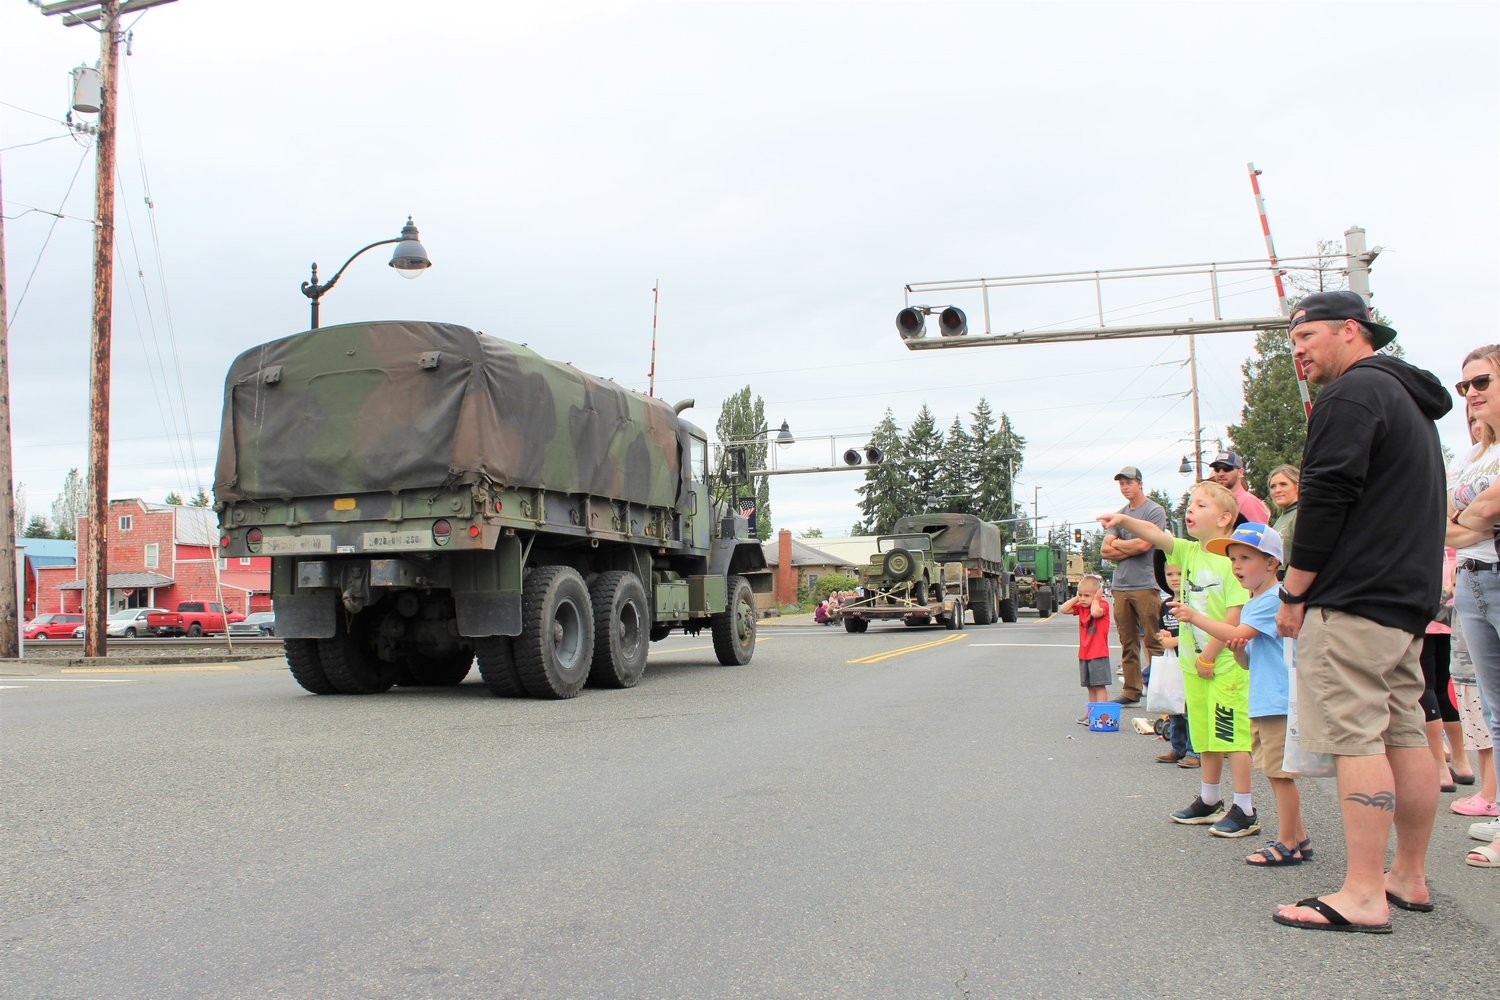 Cohen Williams, 4, and Calloway Potter, 5, react with wonder at military vehicles in the Napavine Funtime Festival parade.